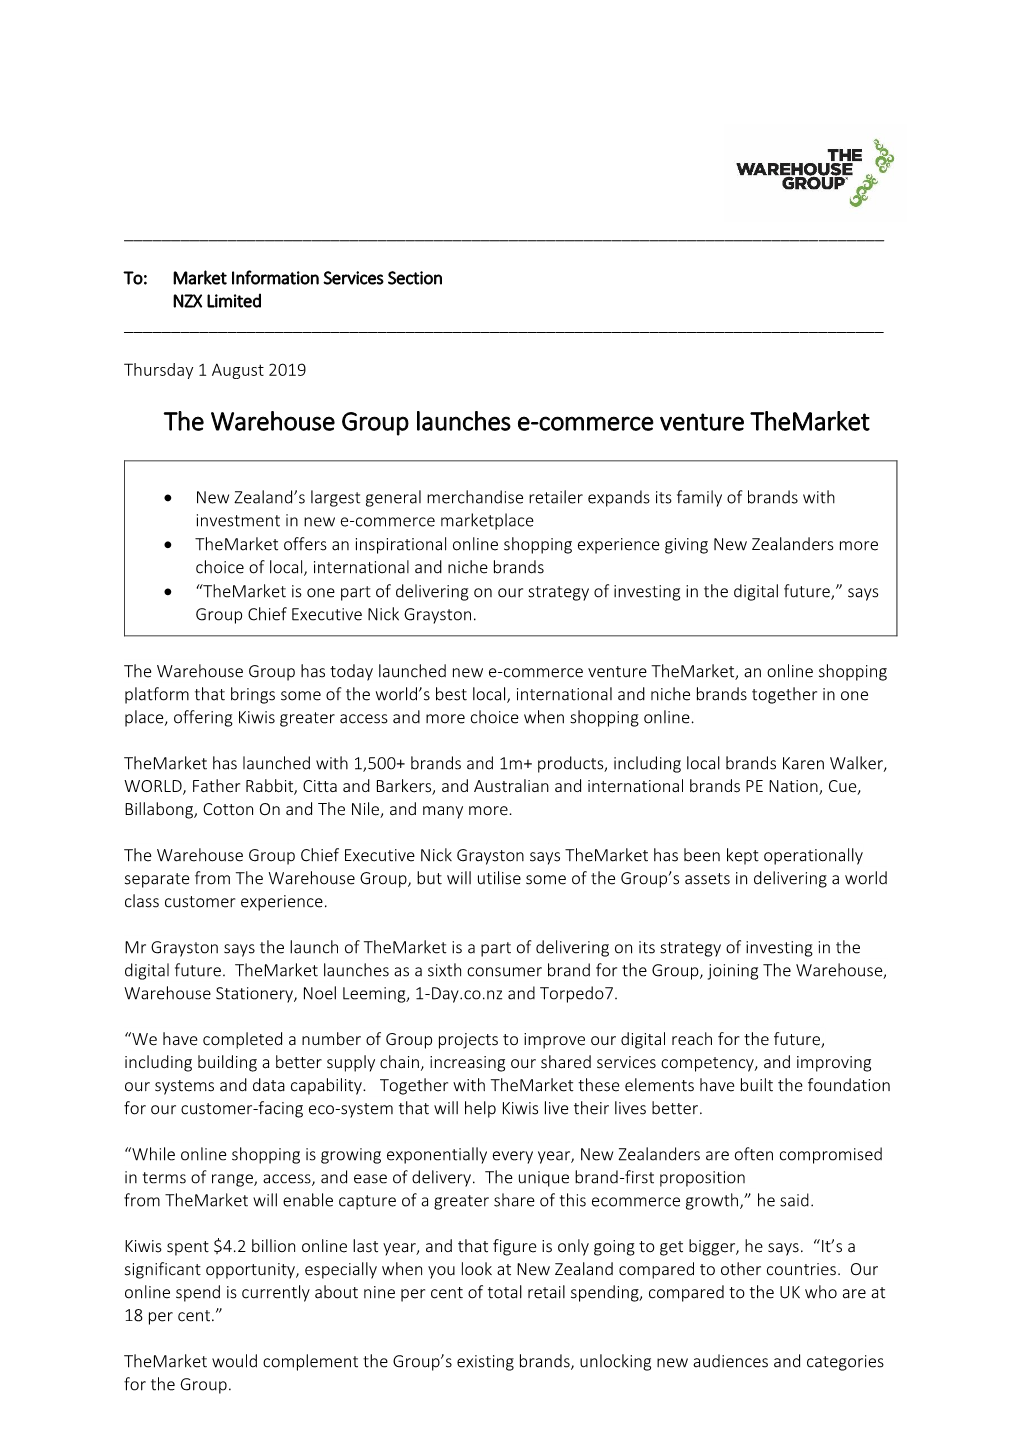 The Warehouse Group Launches E-Commerce Venture Themarket